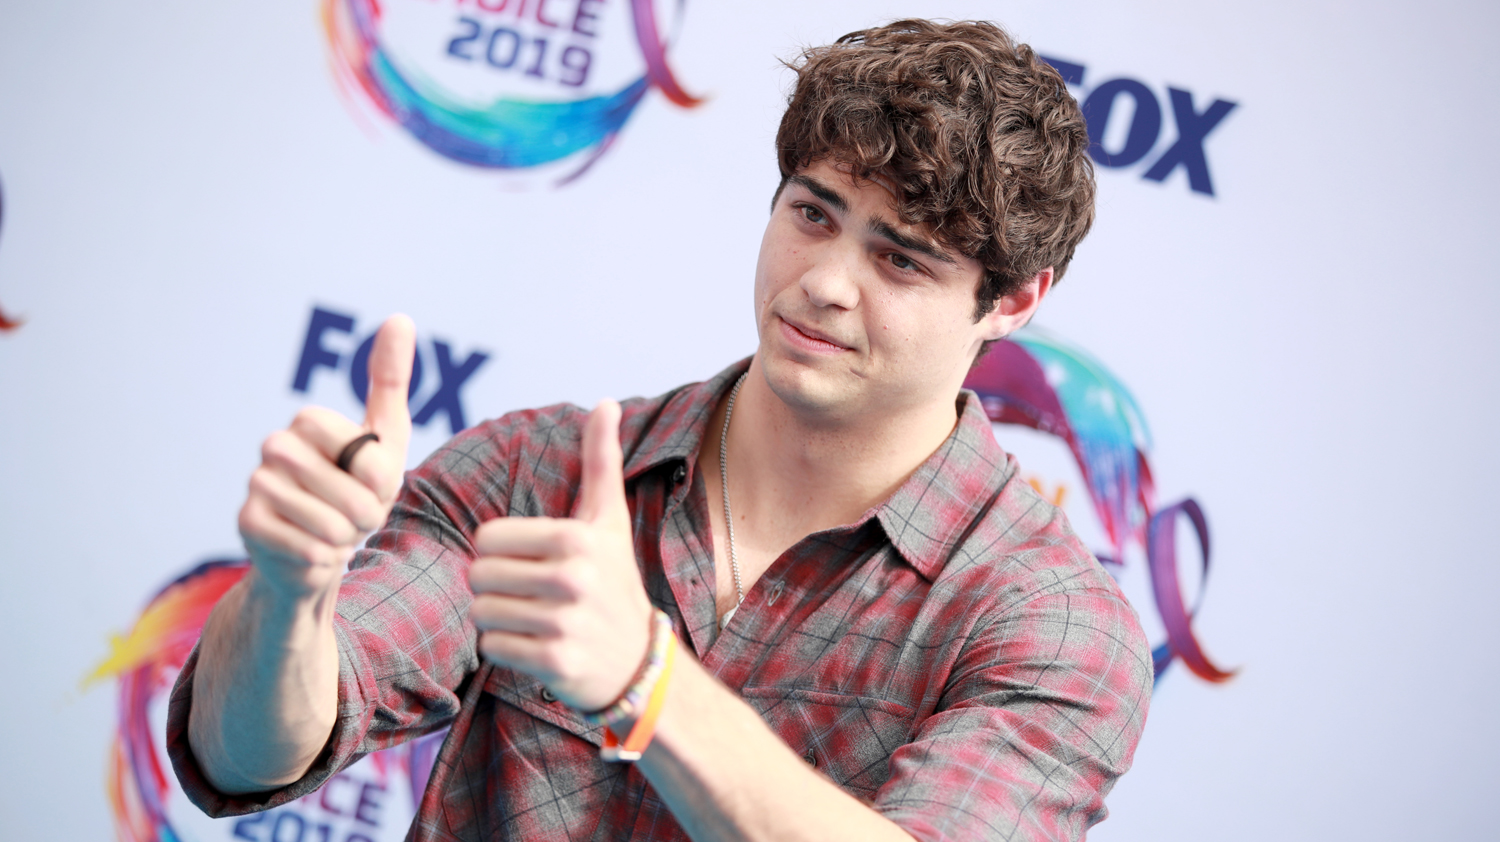 Noah Centineo Posts Phone Number & Wants You to Text Him During Qu...